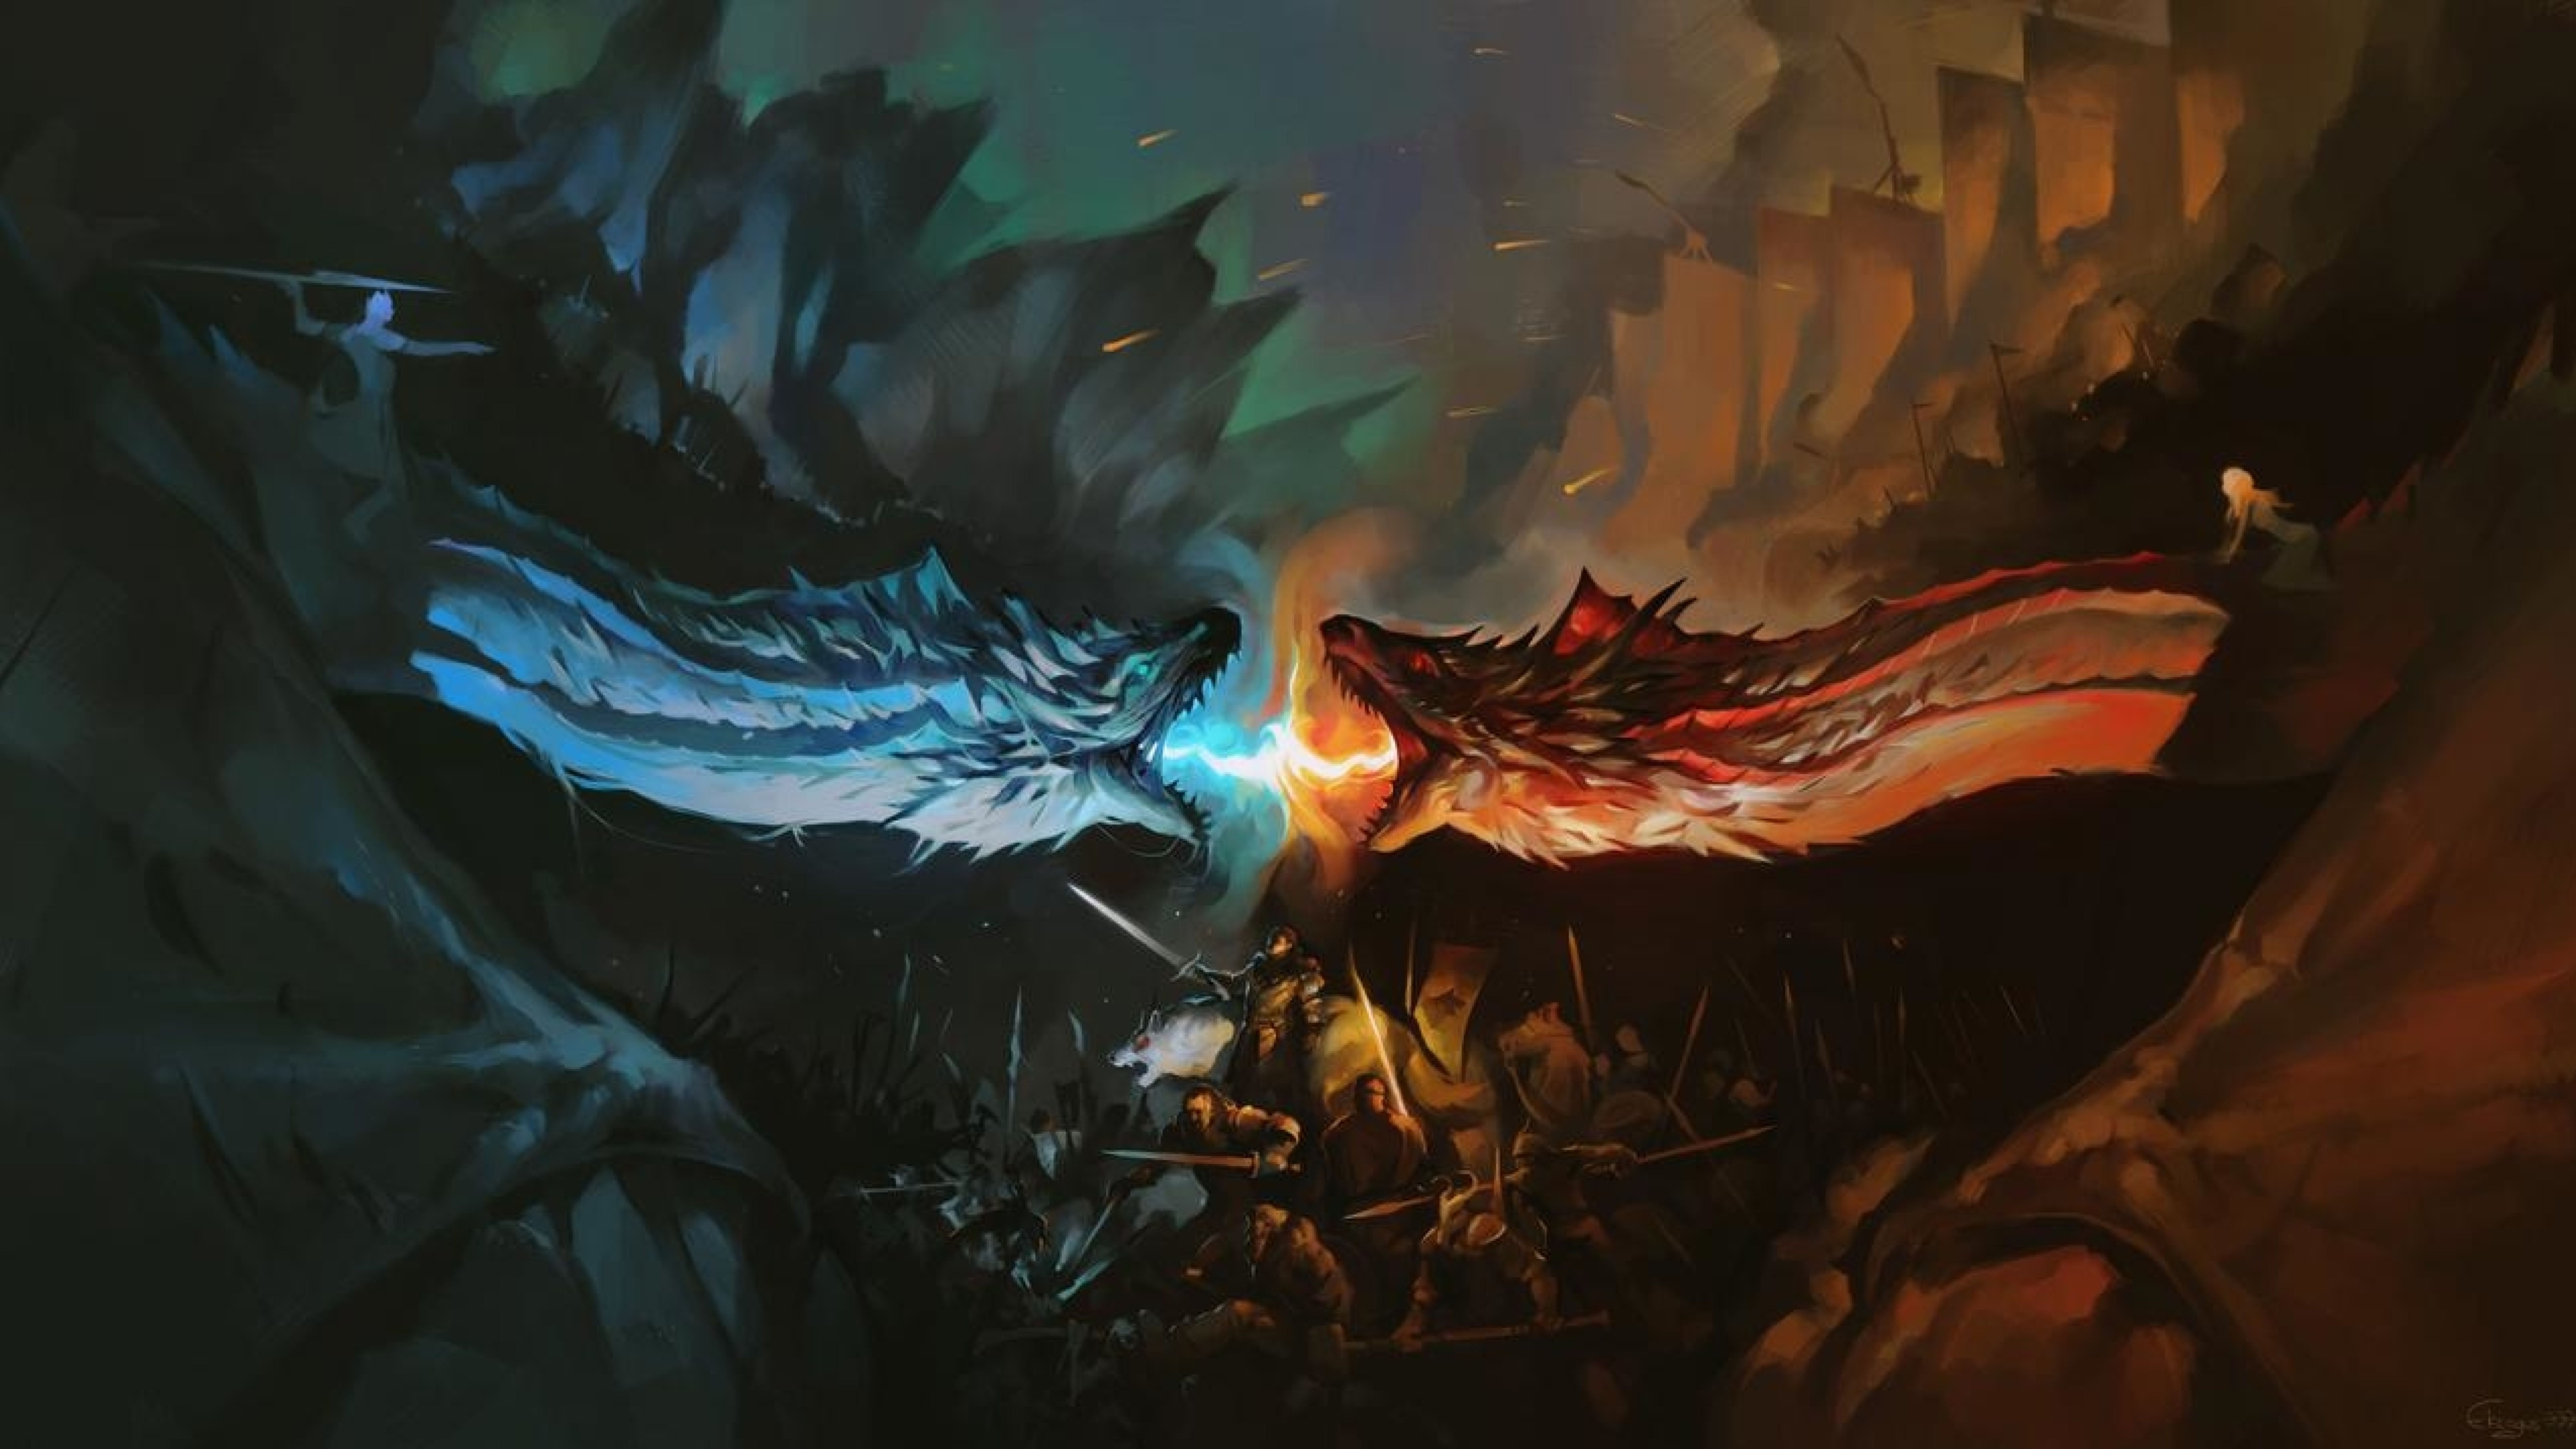 Dragon Battle Fire Vs Ice Game Of Thrones Wallpaper Hd Movies 4k